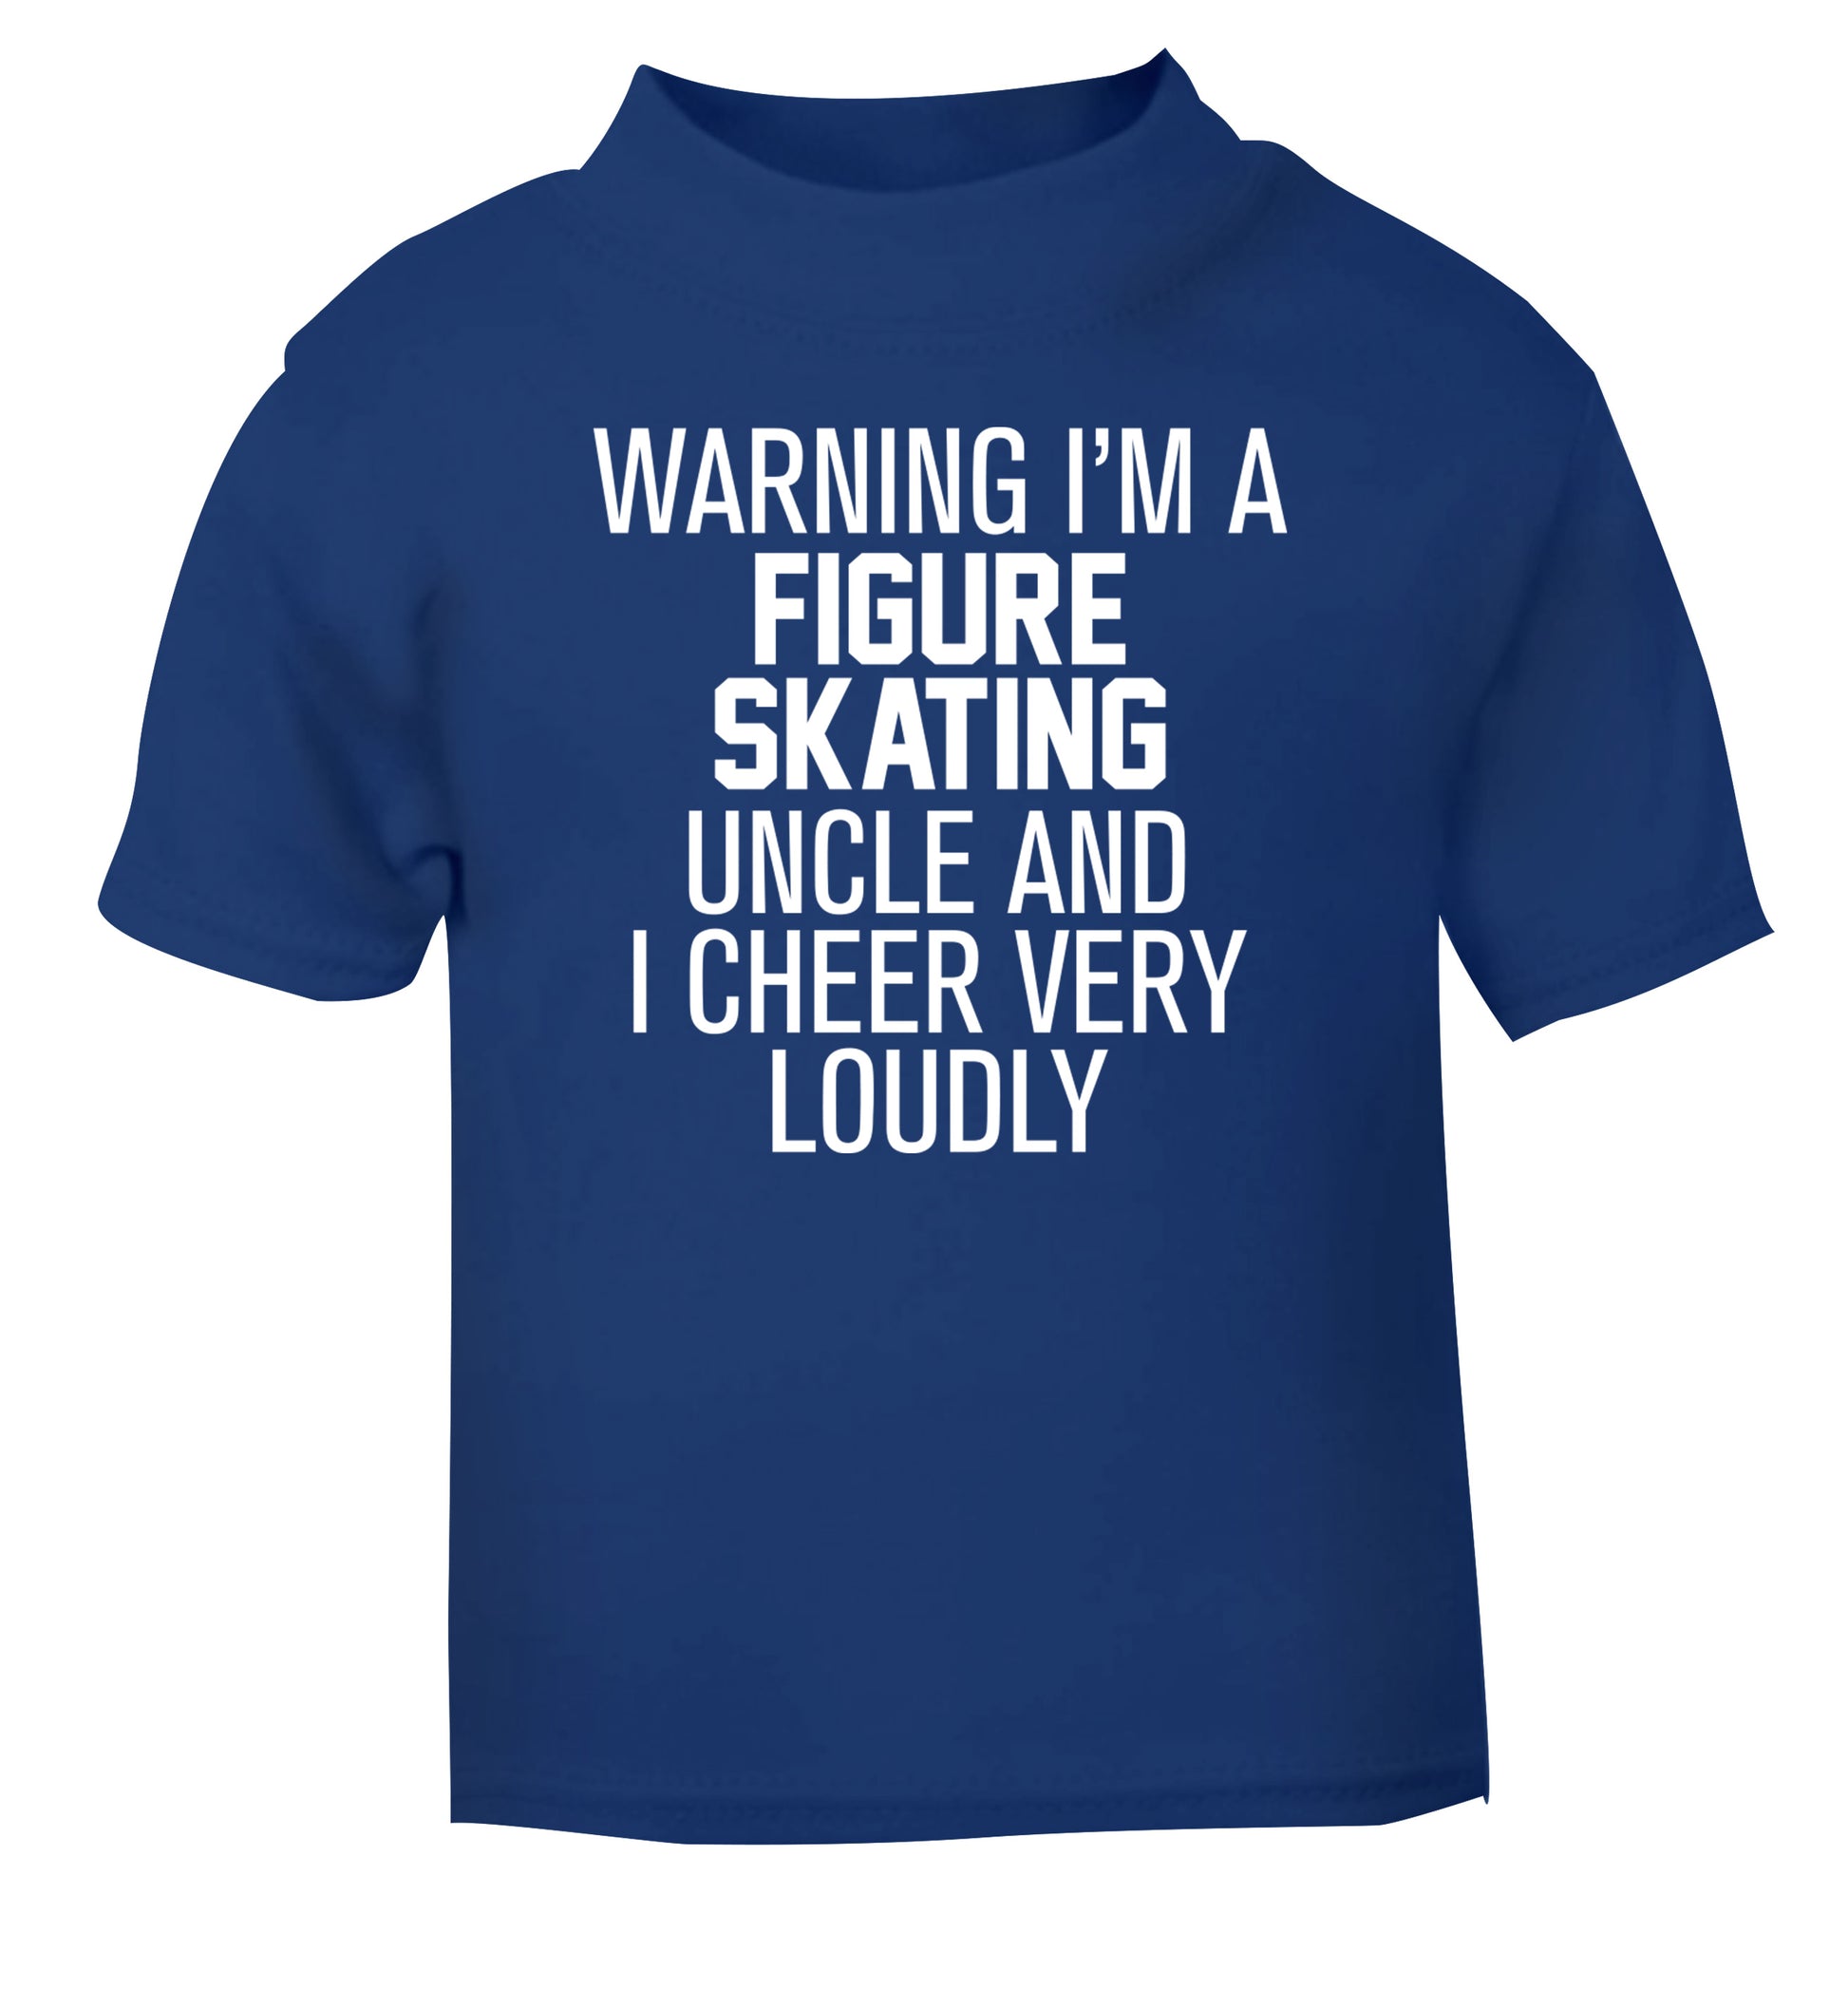 Warning I'm a figure skating uncle and I cheer very loudly blue Baby Toddler Tshirt 2 Years